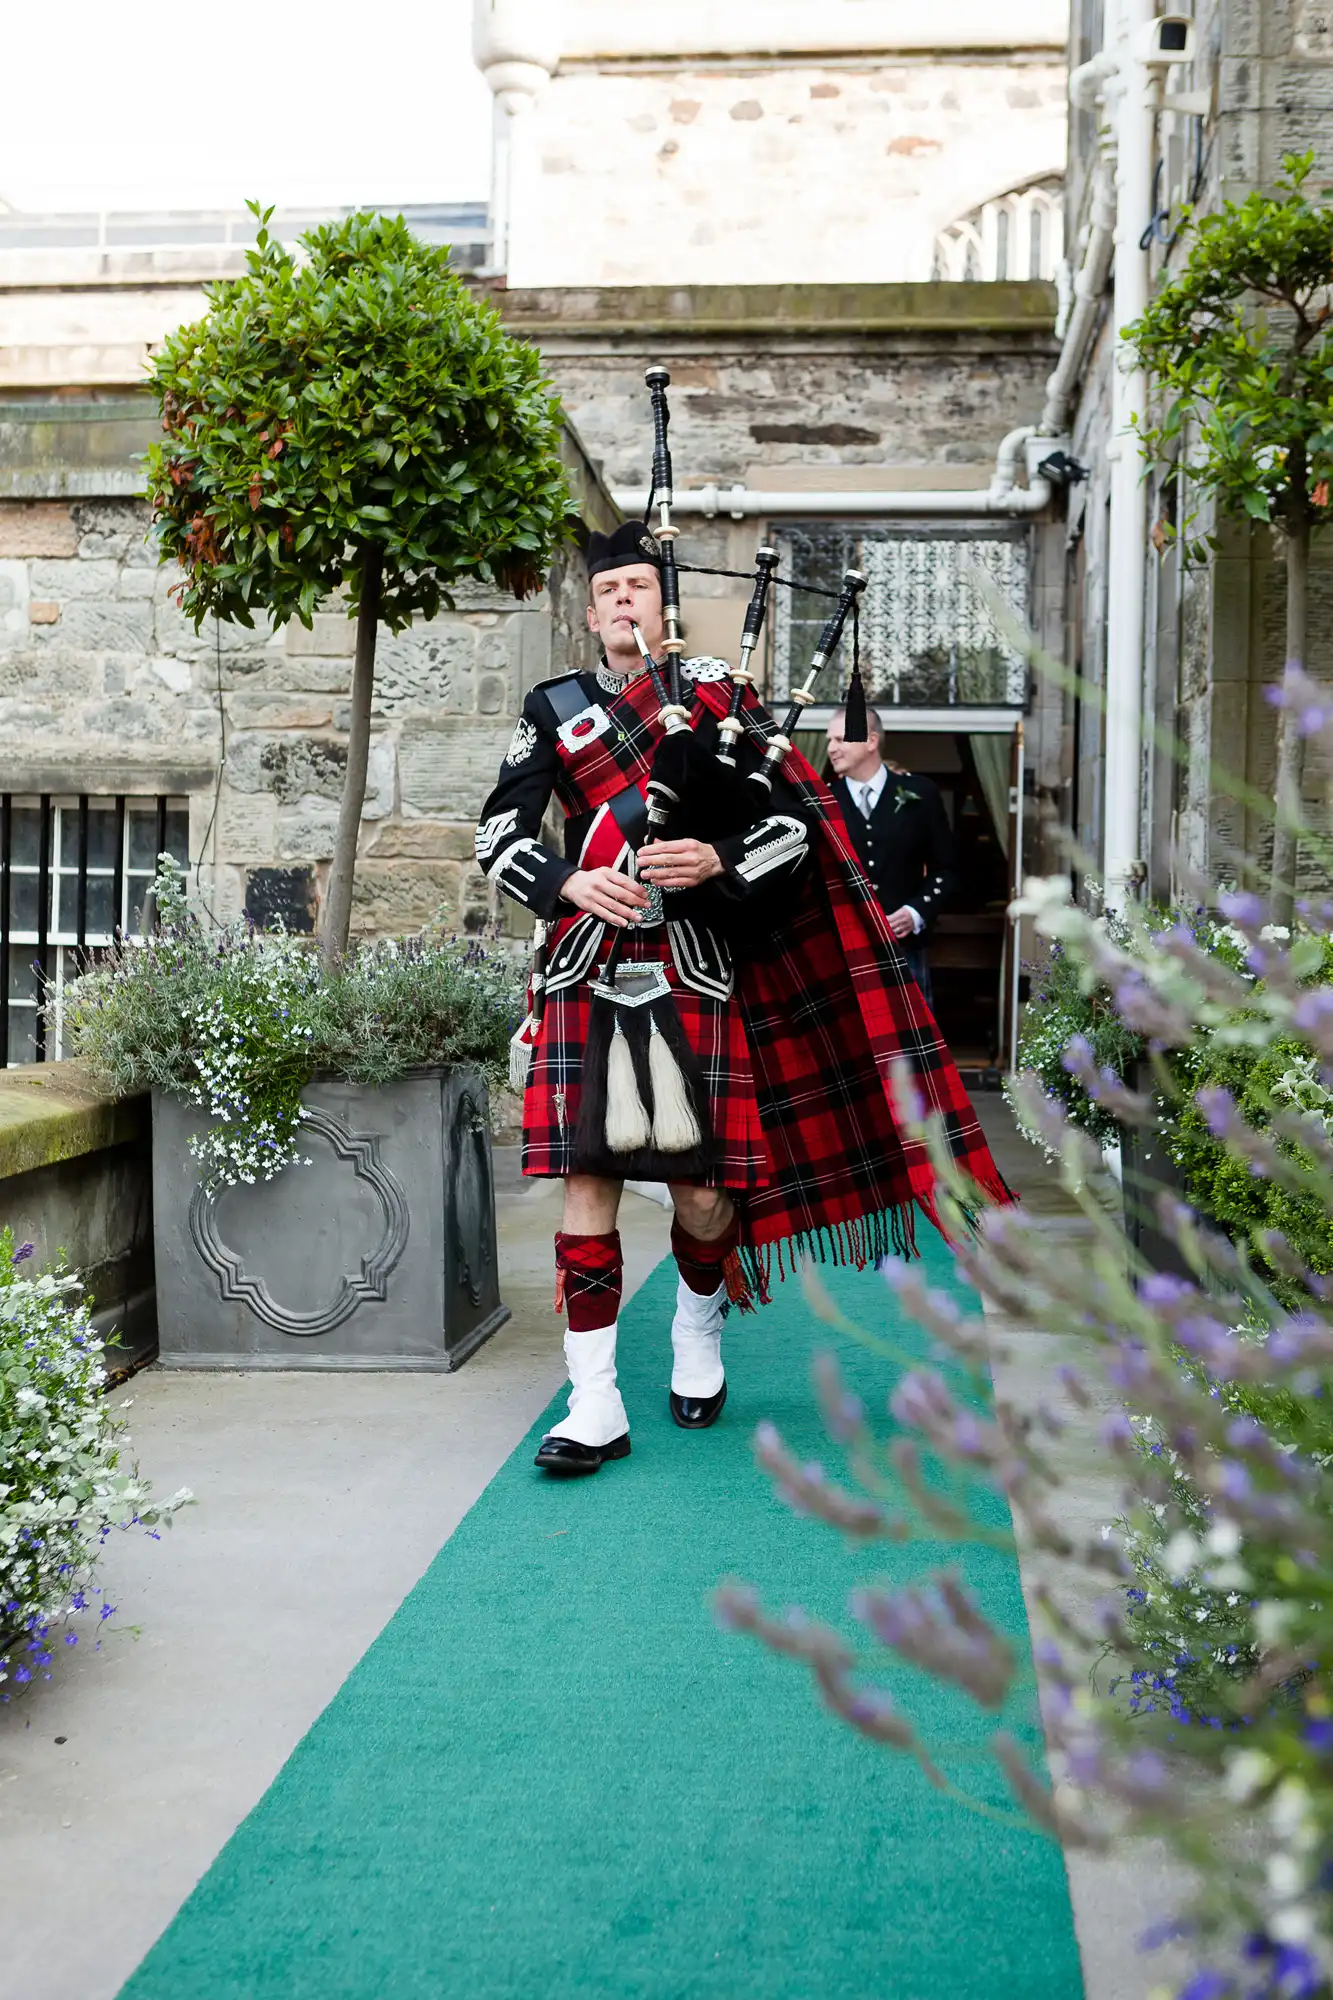 A bagpiper in traditional scottish attire, including a tartan kilt, playing bagpipes in a courtyard with topiary plants.